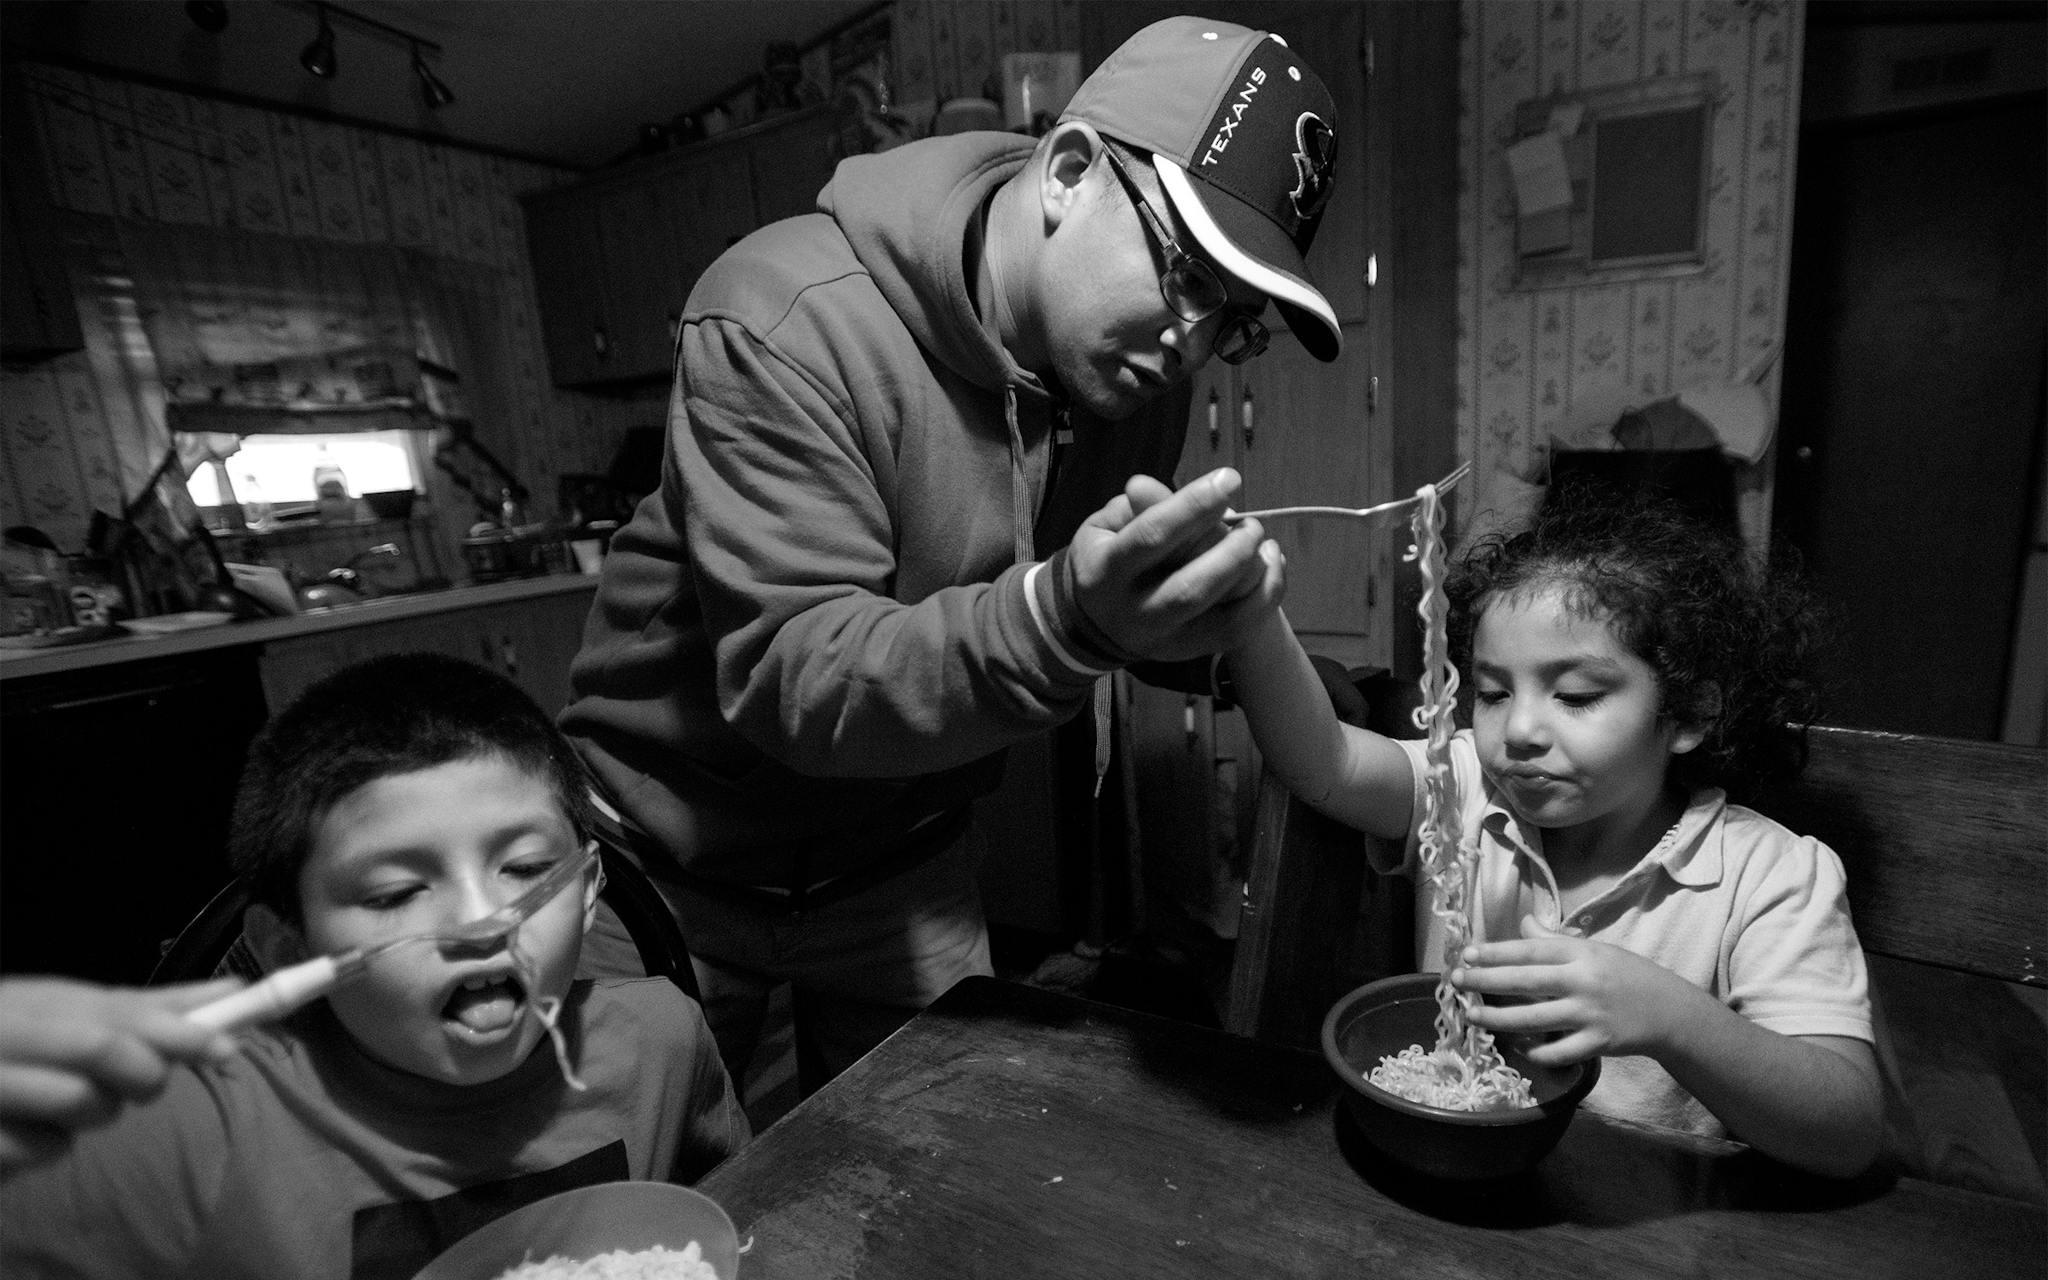 Lee Martinez serves ramen noodles to his sister Arleen’s children, Diomani and Hailee Rivera, at the home they shared with Lee’s mother Maricela in Kyle, after picking them up from school on November 7, 2019.